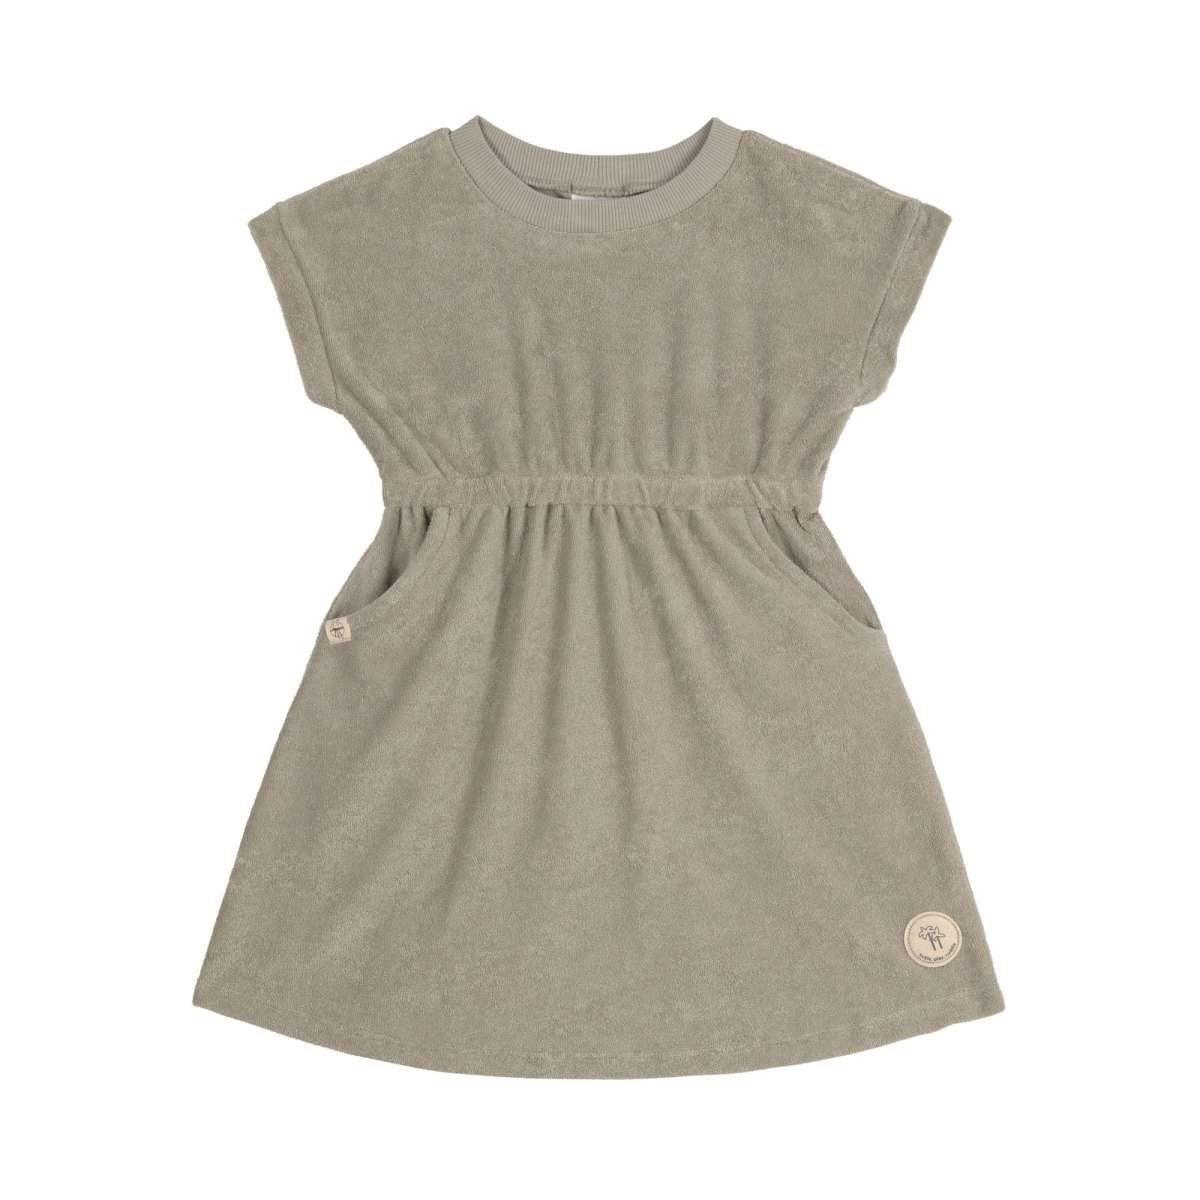 Lassig - Terry Dress olive, 86/92, 13-24 months